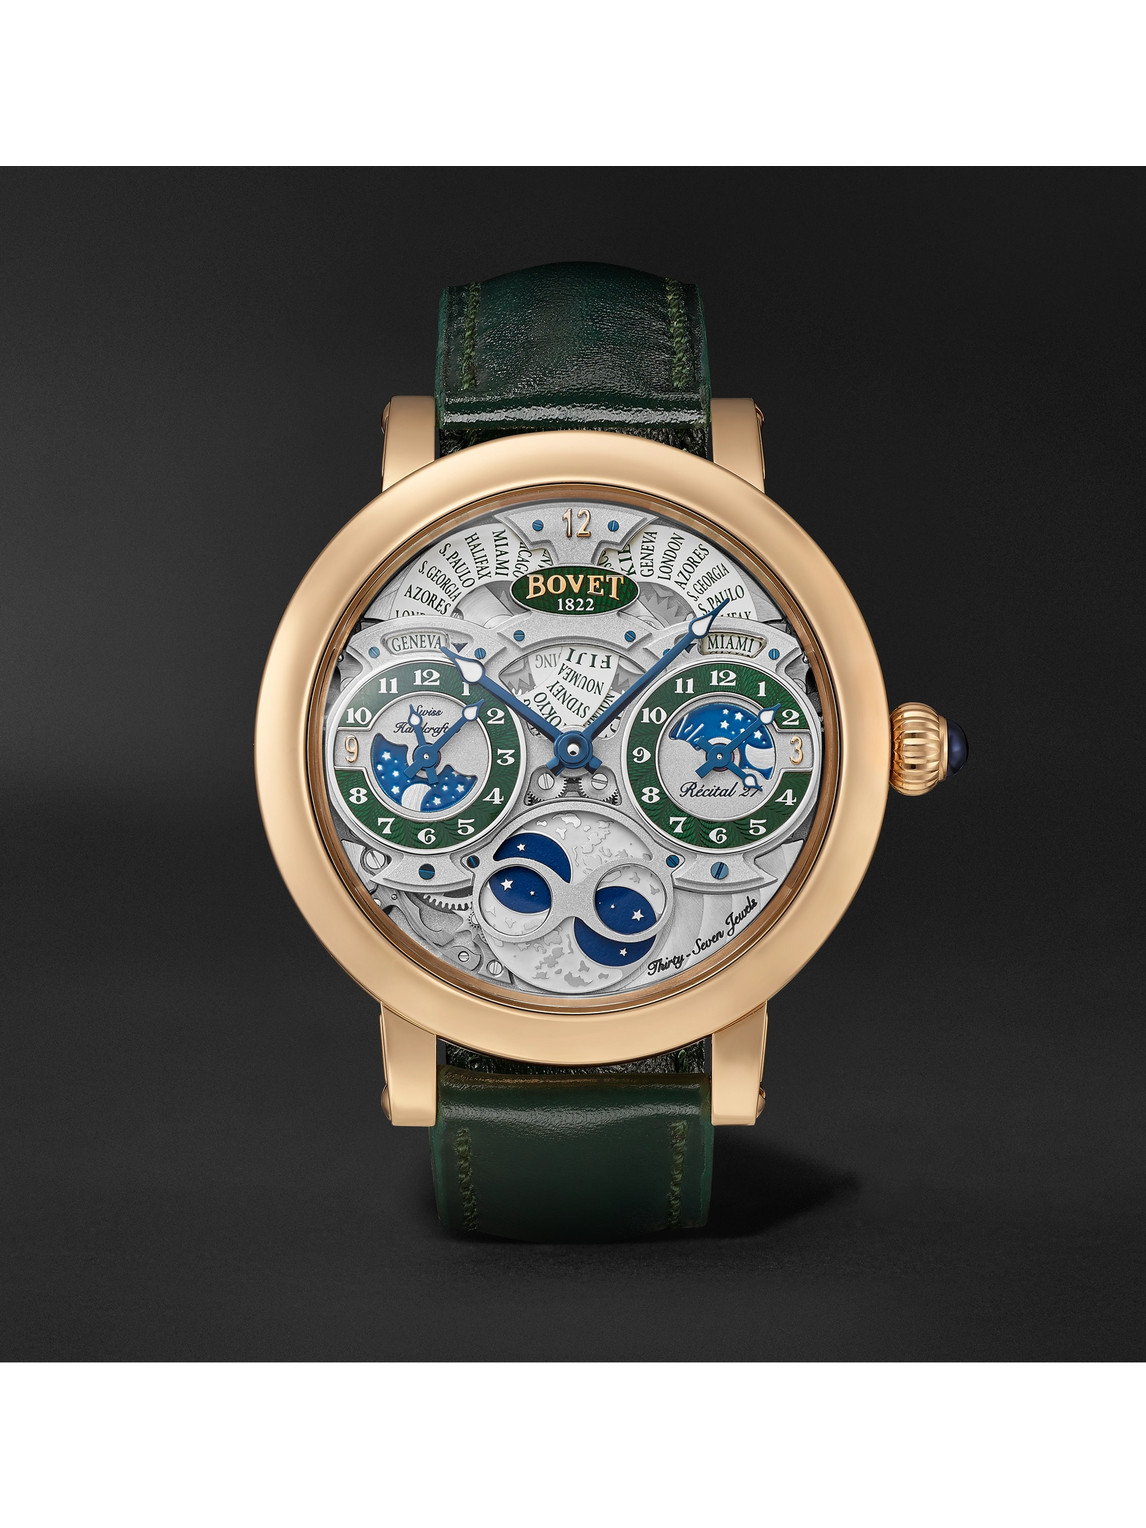 Bovet Récital 27 Limited Edition Hand-wound 46mm 18-karat Red Gold And Leather Watch, Ref. No. R270007 In Green